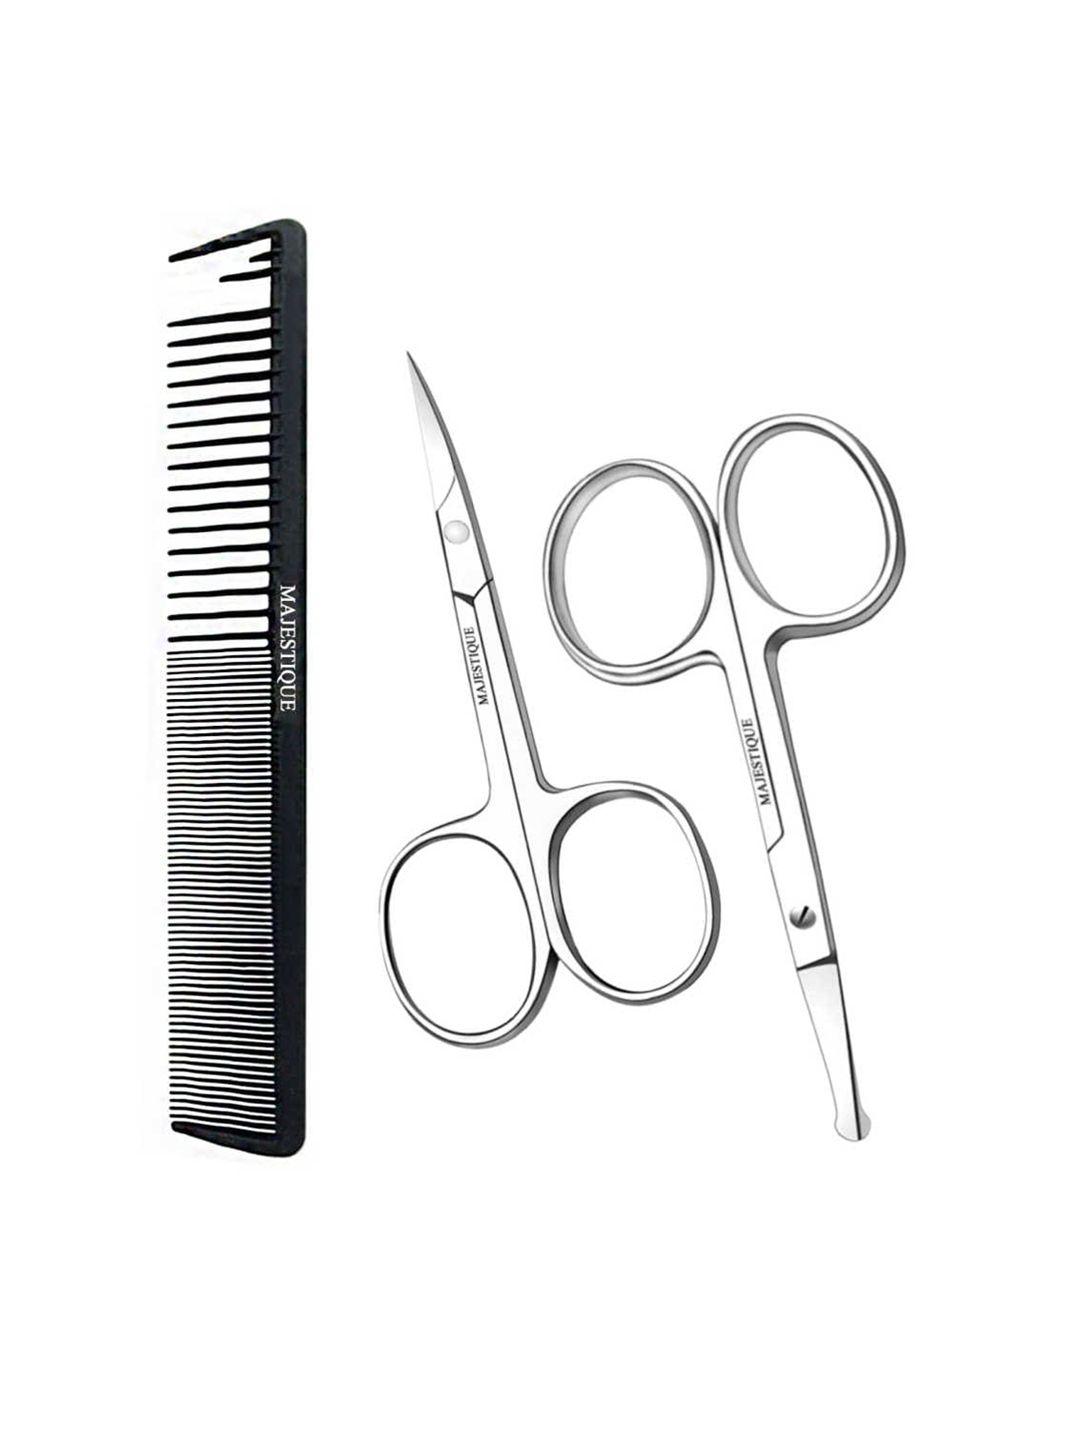 majestique facial hair grooming kit